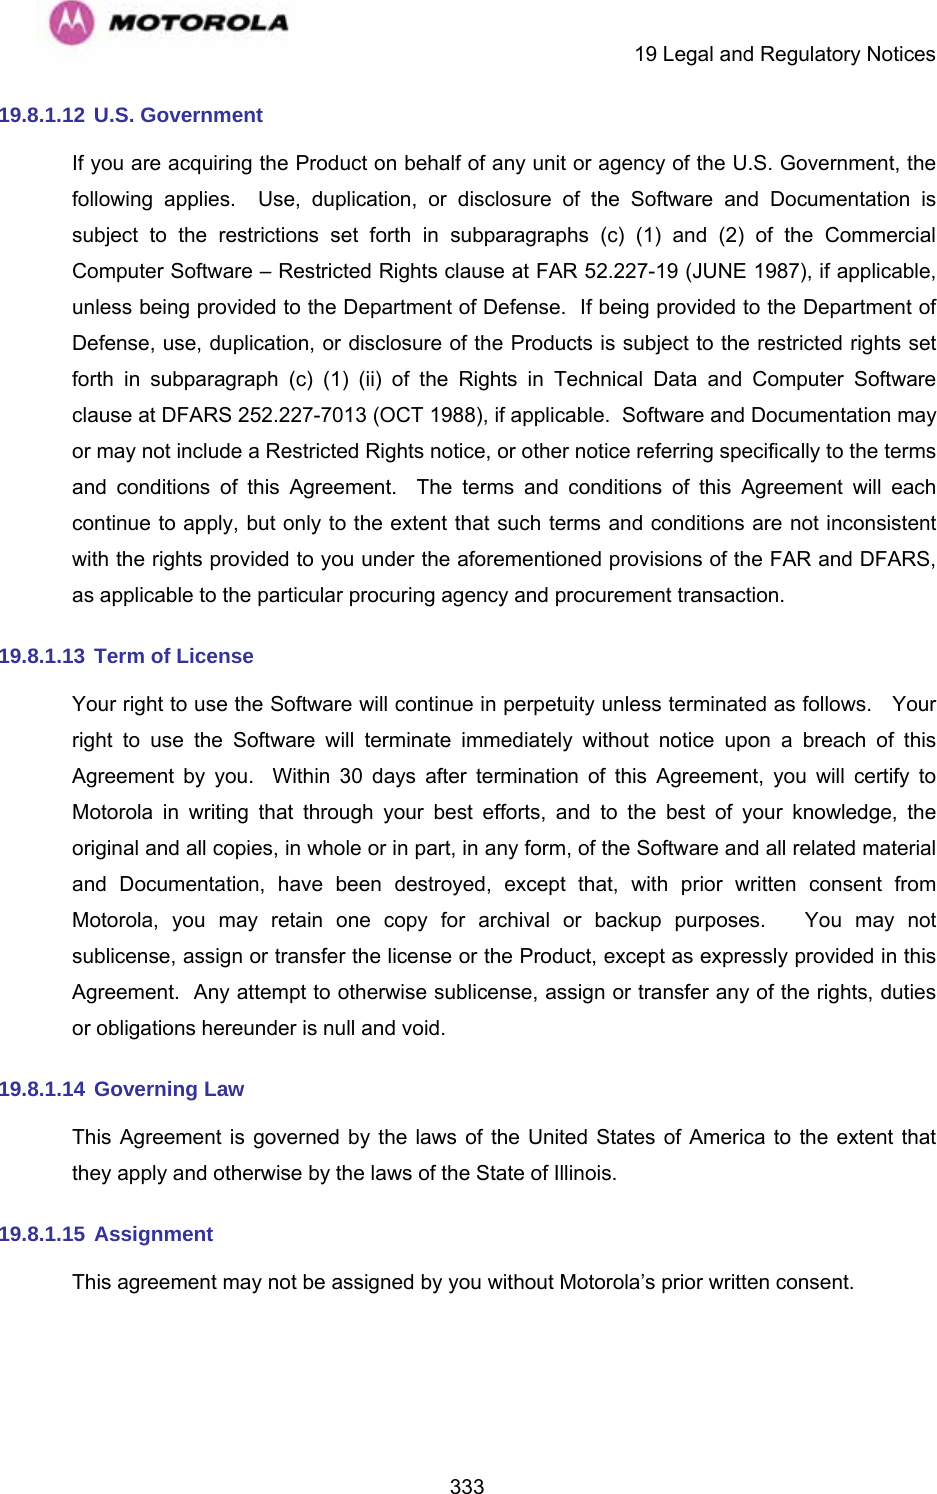     19 Legal and Regulatory Notices  33319.8.1.12  U.S. Government If you are acquiring the Product on behalf of any unit or agency of the U.S. Government, the following applies.  Use, duplication, or disclosure of the Software and Documentation is subject to the restrictions set forth in subparagraphs (c) (1) and (2) of the Commercial Computer Software – Restricted Rights clause at FAR 52.227-19 (JUNE 1987), if applicable, unless being provided to the Department of Defense.  If being provided to the Department of Defense, use, duplication, or disclosure of the Products is subject to the restricted rights set forth in subparagraph (c) (1) (ii) of the Rights in Technical Data and Computer Software clause at DFARS 252.227-7013 (OCT 1988), if applicable.  Software and Documentation may or may not include a Restricted Rights notice, or other notice referring specifically to the terms and conditions of this Agreement.  The terms and conditions of this Agreement will each continue to apply, but only to the extent that such terms and conditions are not inconsistent with the rights provided to you under the aforementioned provisions of the FAR and DFARS, as applicable to the particular procuring agency and procurement transaction. 19.8.1.13  Term of License Your right to use the Software will continue in perpetuity unless terminated as follows.   Your right to use the Software will terminate immediately without notice upon a breach of this Agreement by you.  Within 30 days after termination of this Agreement, you will certify to Motorola in writing that through your best efforts, and to the best of your knowledge, the original and all copies, in whole or in part, in any form, of the Software and all related material and Documentation, have been destroyed, except that, with prior written consent from Motorola, you may retain one copy for archival or backup purposes.   You may not sublicense, assign or transfer the license or the Product, except as expressly provided in this Agreement.  Any attempt to otherwise sublicense, assign or transfer any of the rights, duties or obligations hereunder is null and void. 19.8.1.14  Governing  Law This Agreement is governed by the laws of the United States of America to the extent that they apply and otherwise by the laws of the State of Illinois. 19.8.1.15  Assignment This agreement may not be assigned by you without Motorola’s prior written consent. 